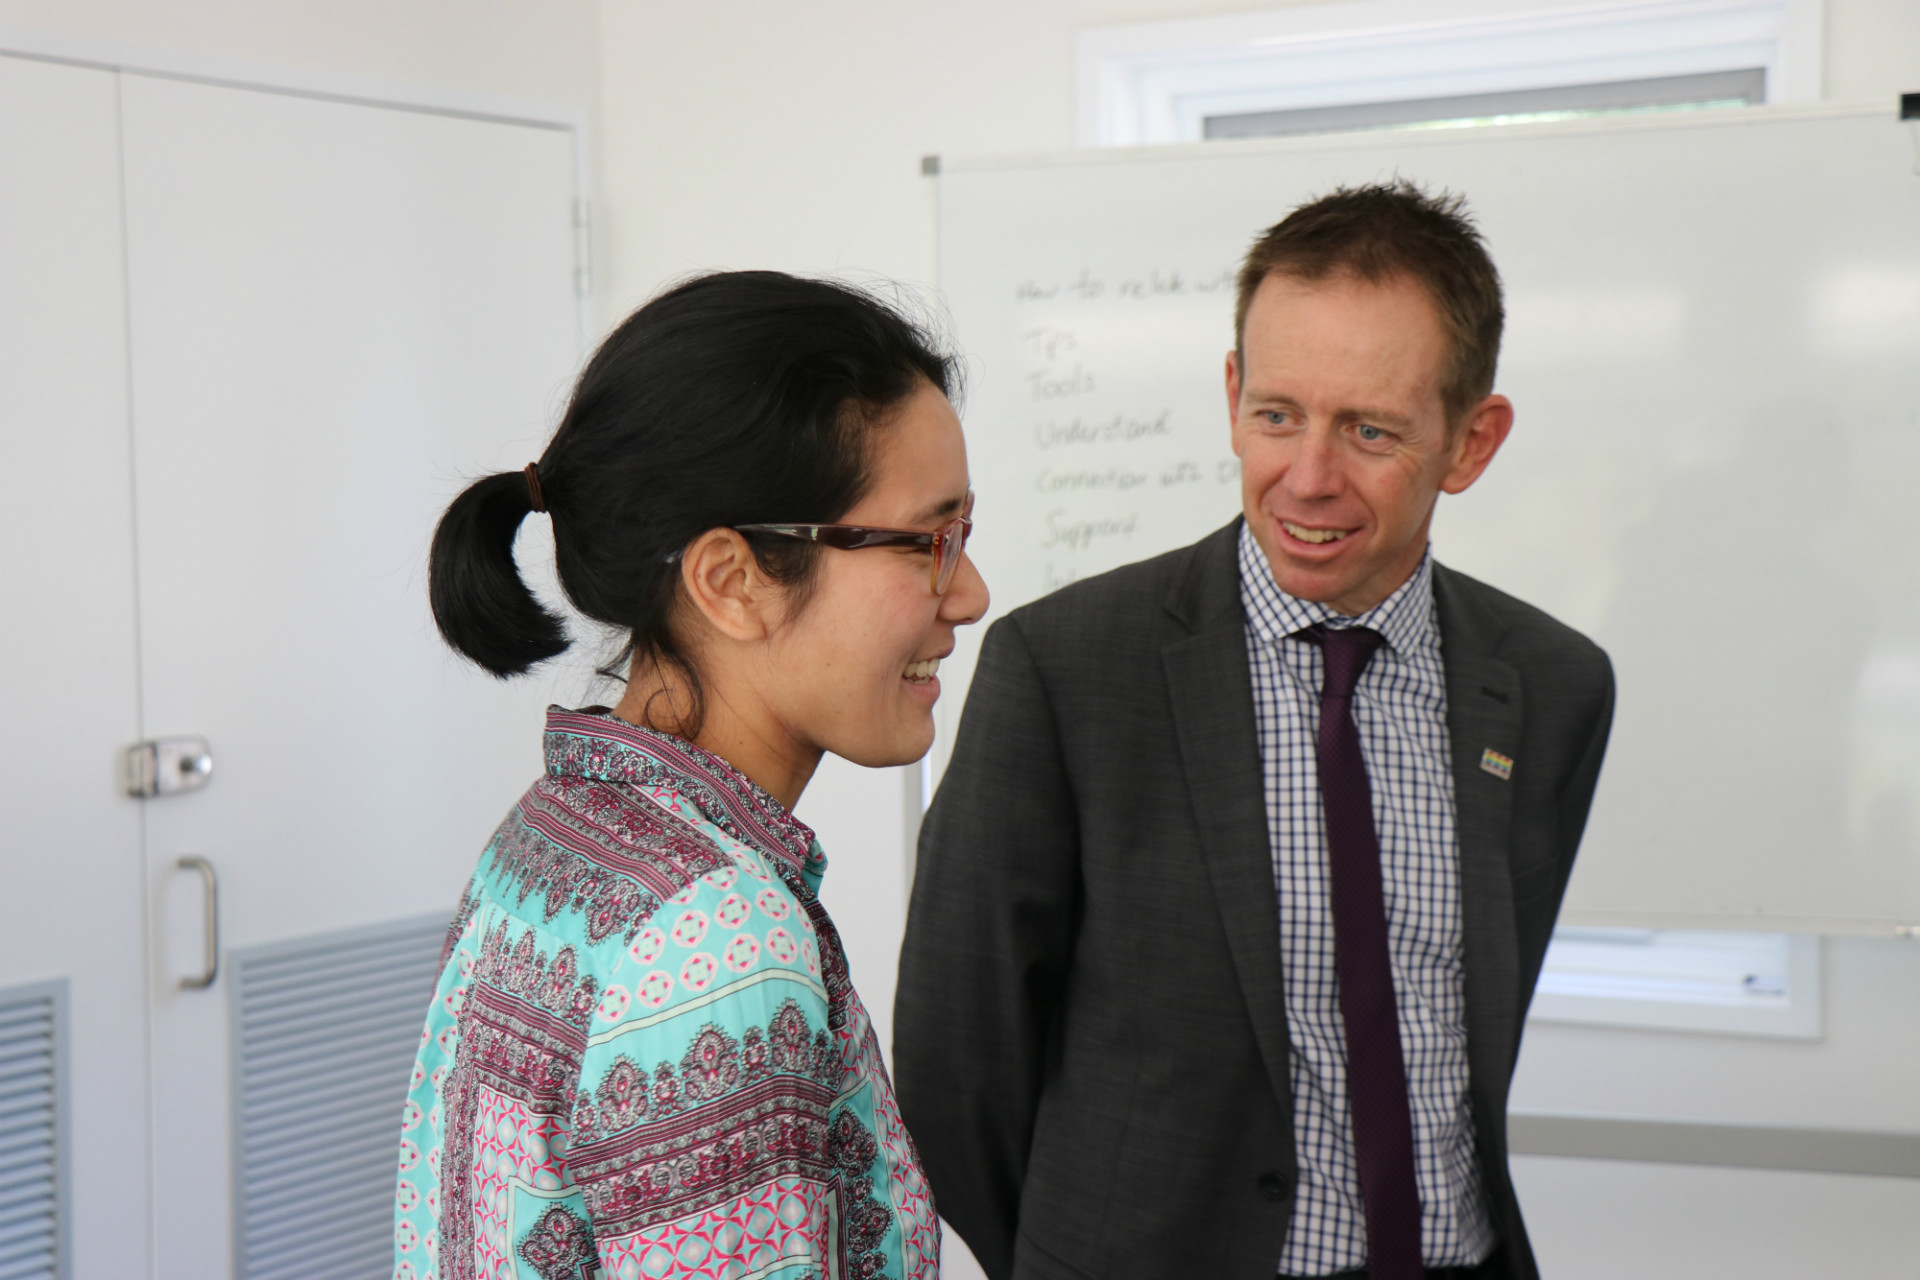 Minister Rattenbury talking to Julia, Health Promotion Officer at Women's Centre for Health Matters